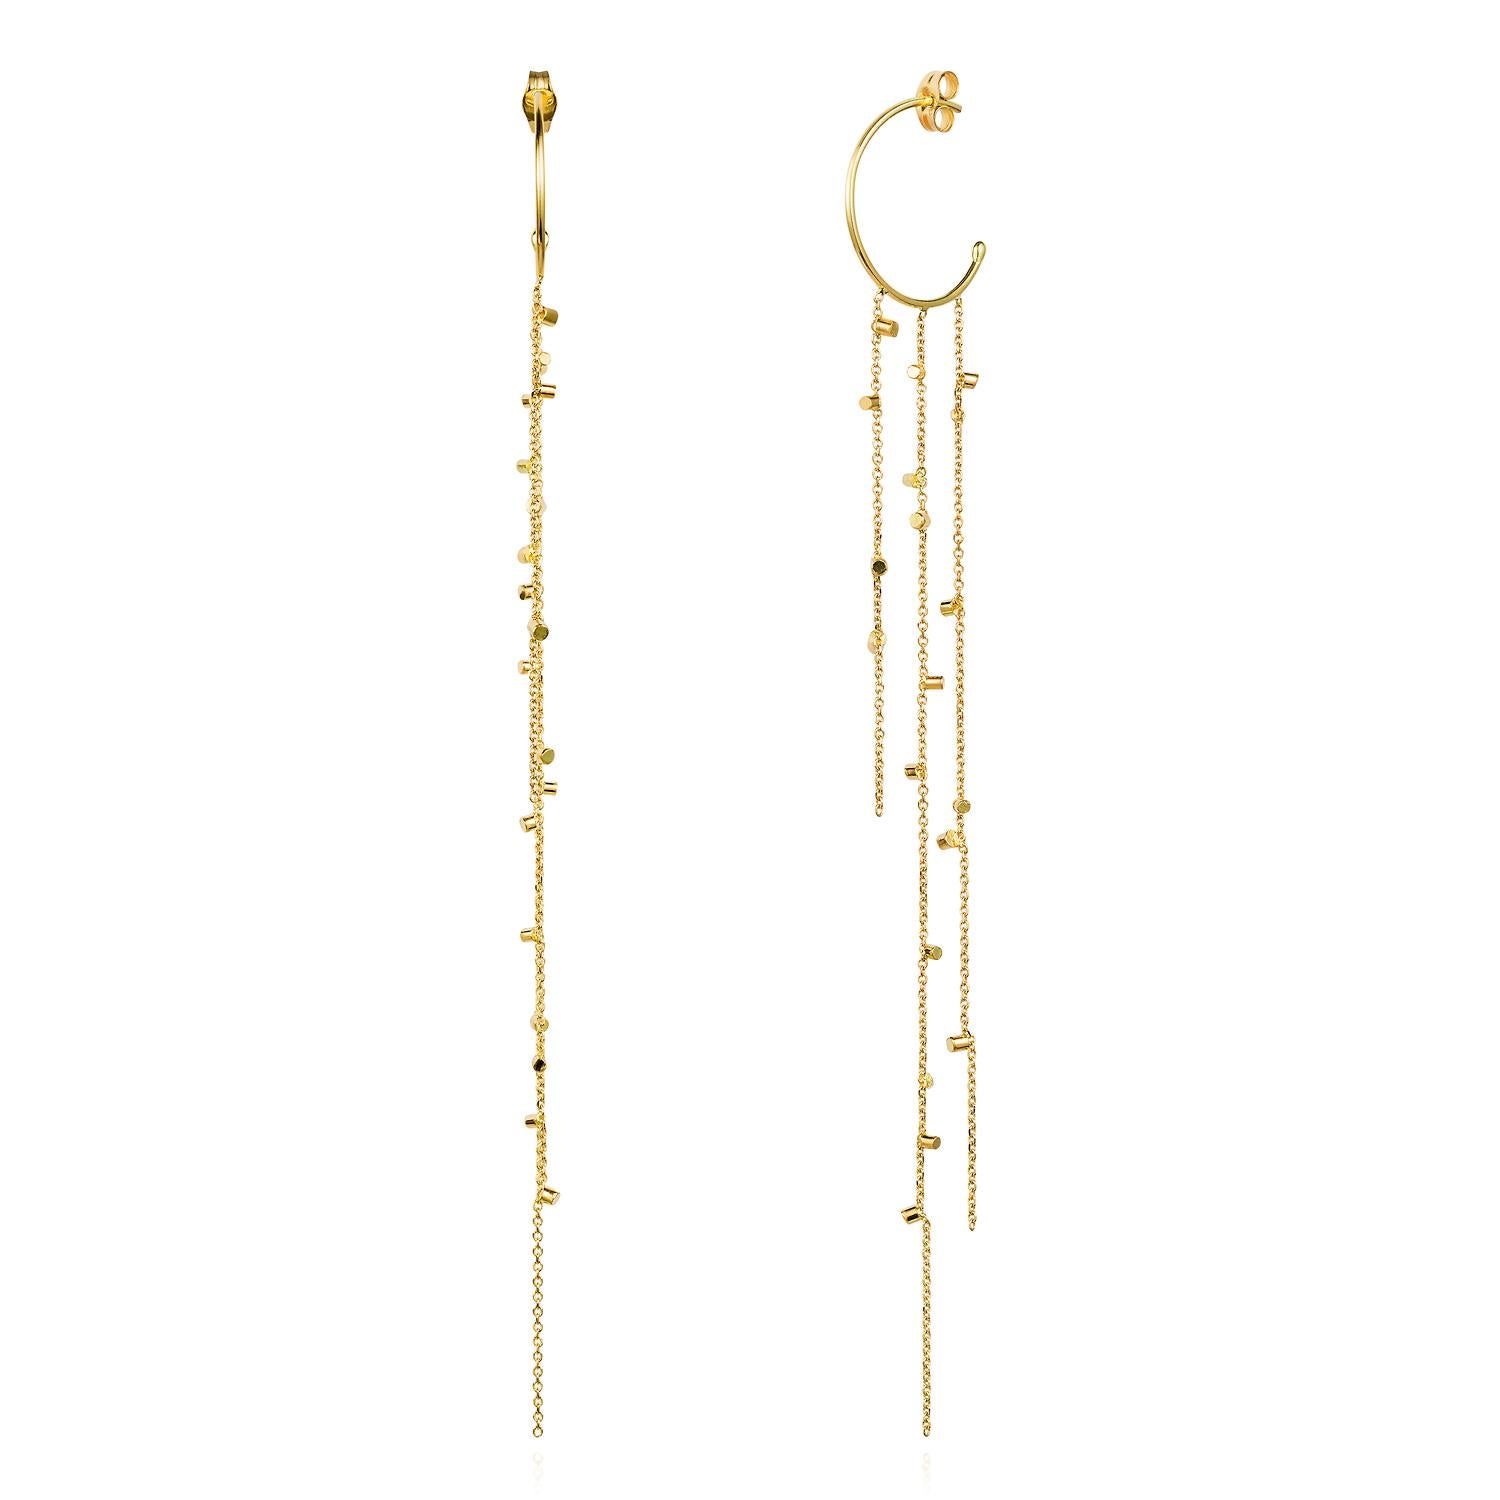 A pair of 18k yellow gold small hoop earrings with long strands of fine chain sprinkled with a shimmering of gold embellishments. These fabulous hooplets are 1.4cm diameter and the length of each earring is 9.5cm. From Sweet Pea's Gold Dust